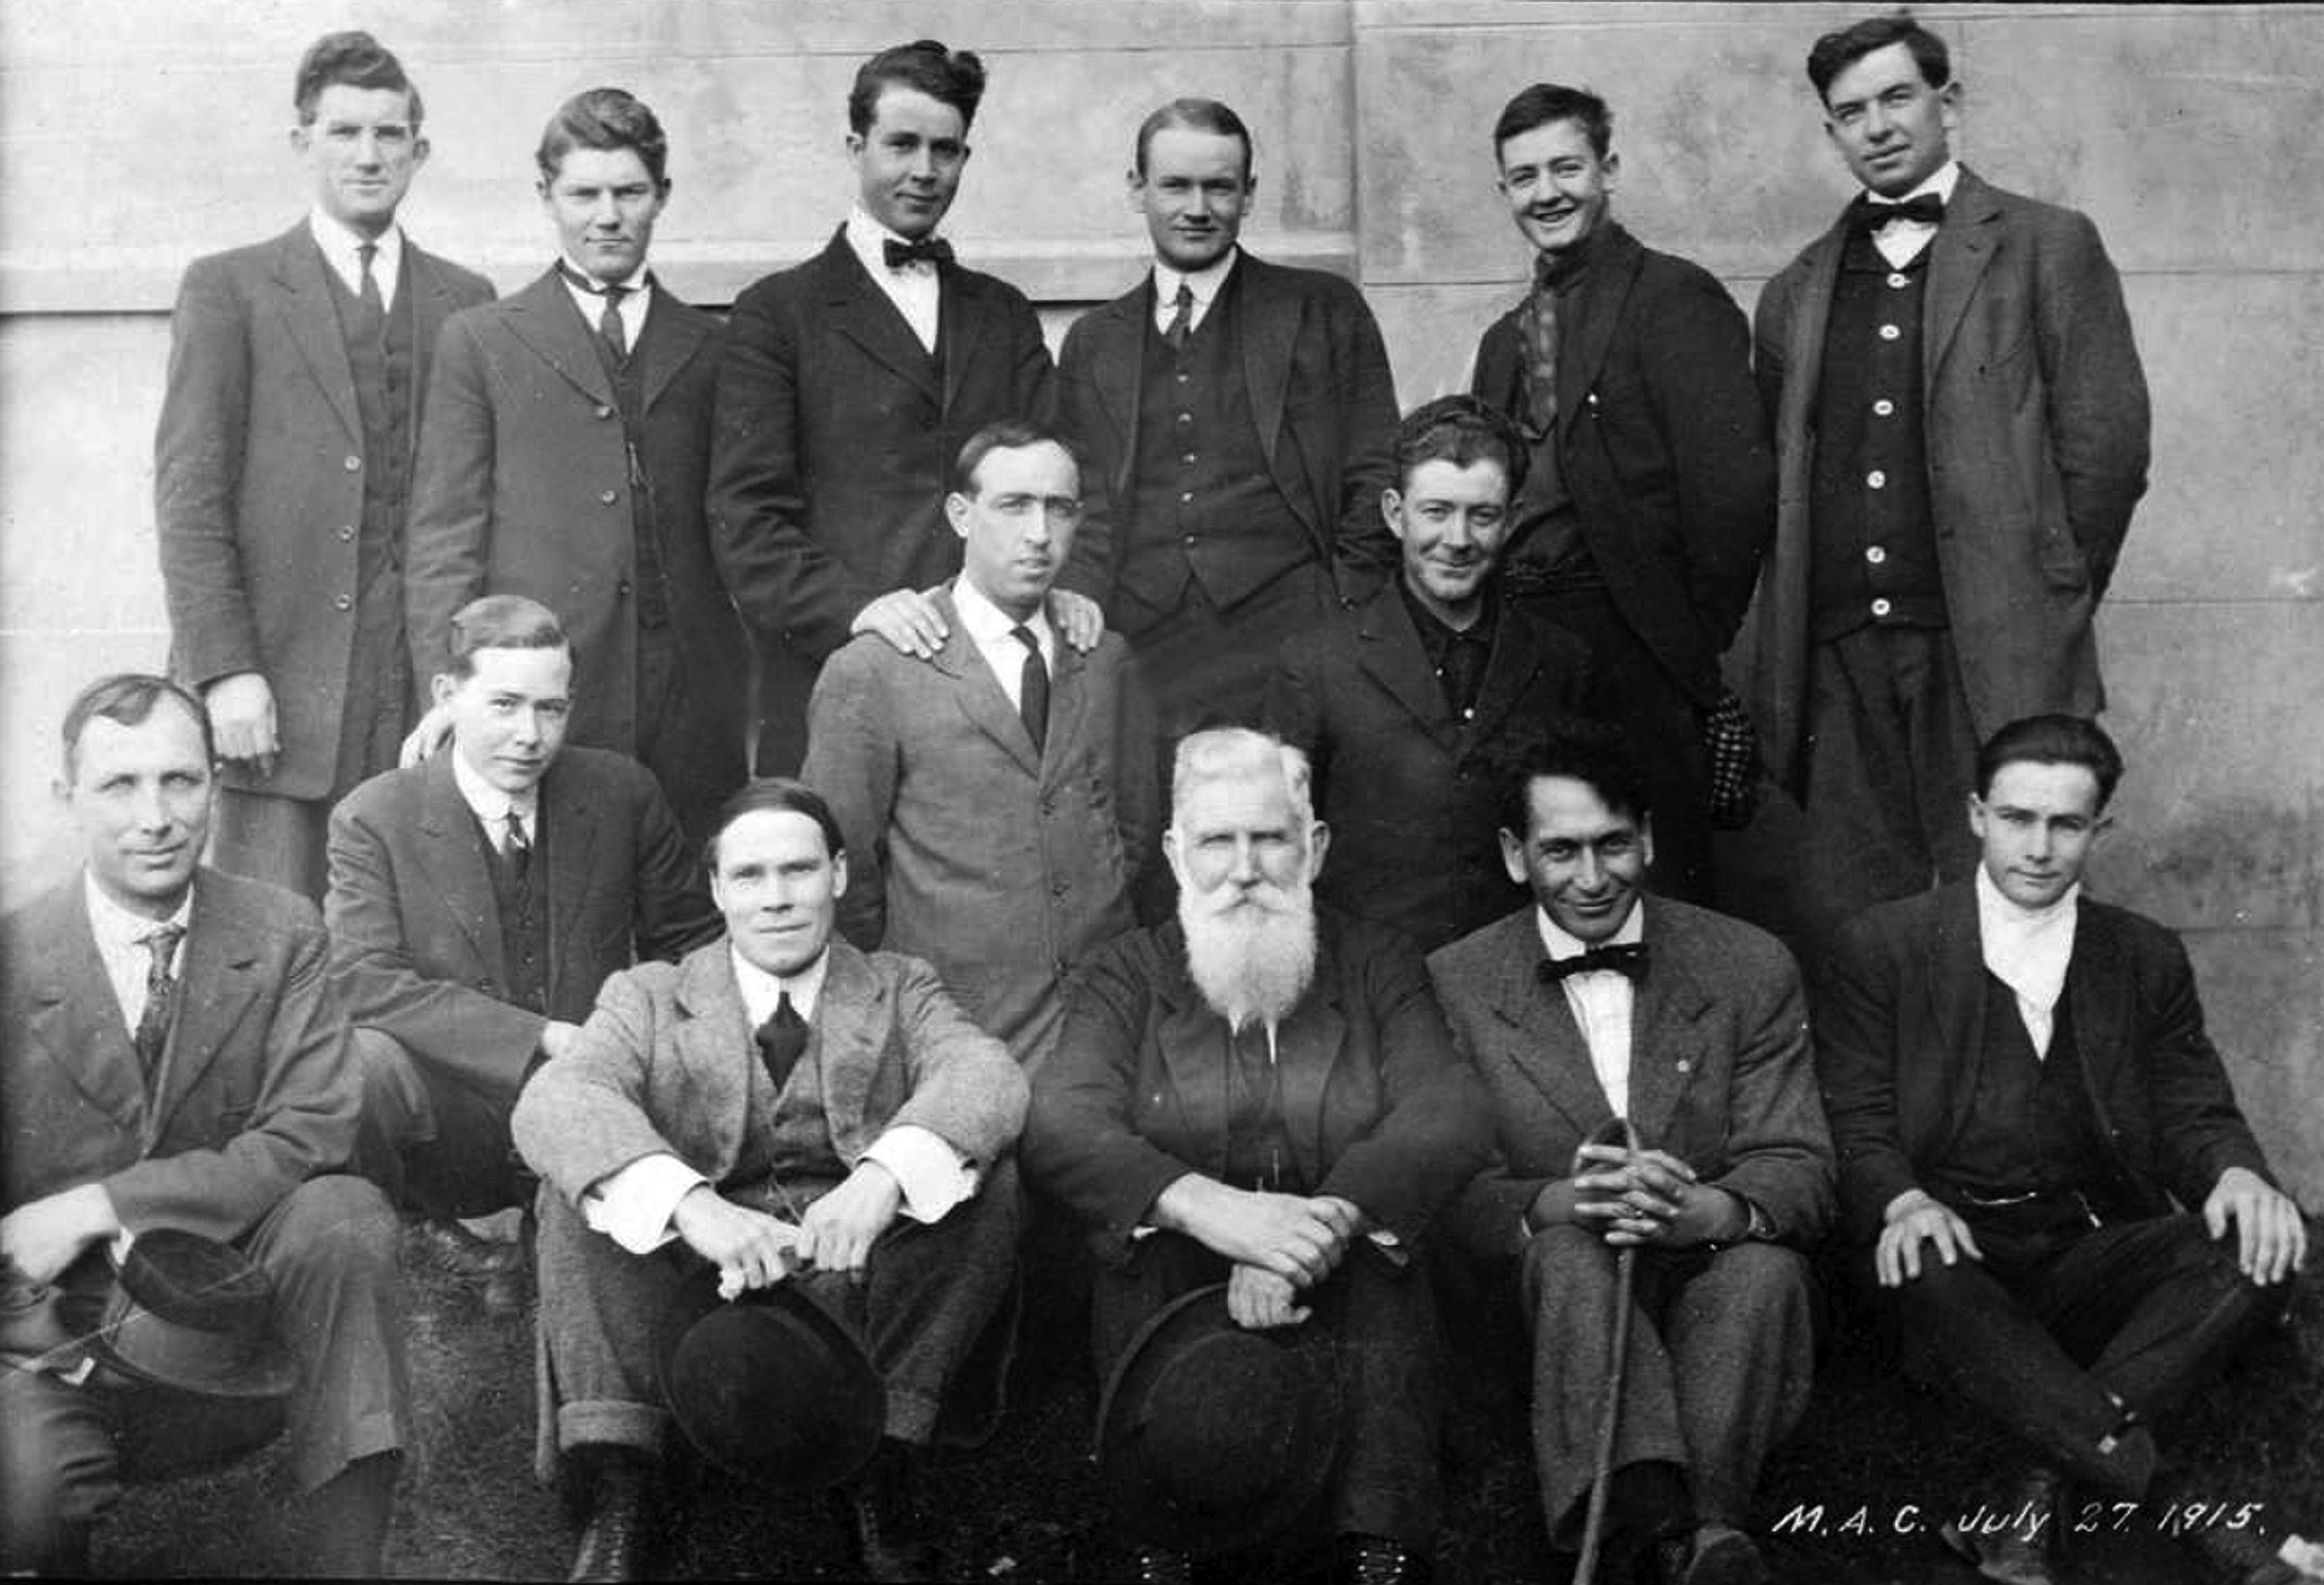 Missionaries in New Zealand Mission office, July 27, 1915